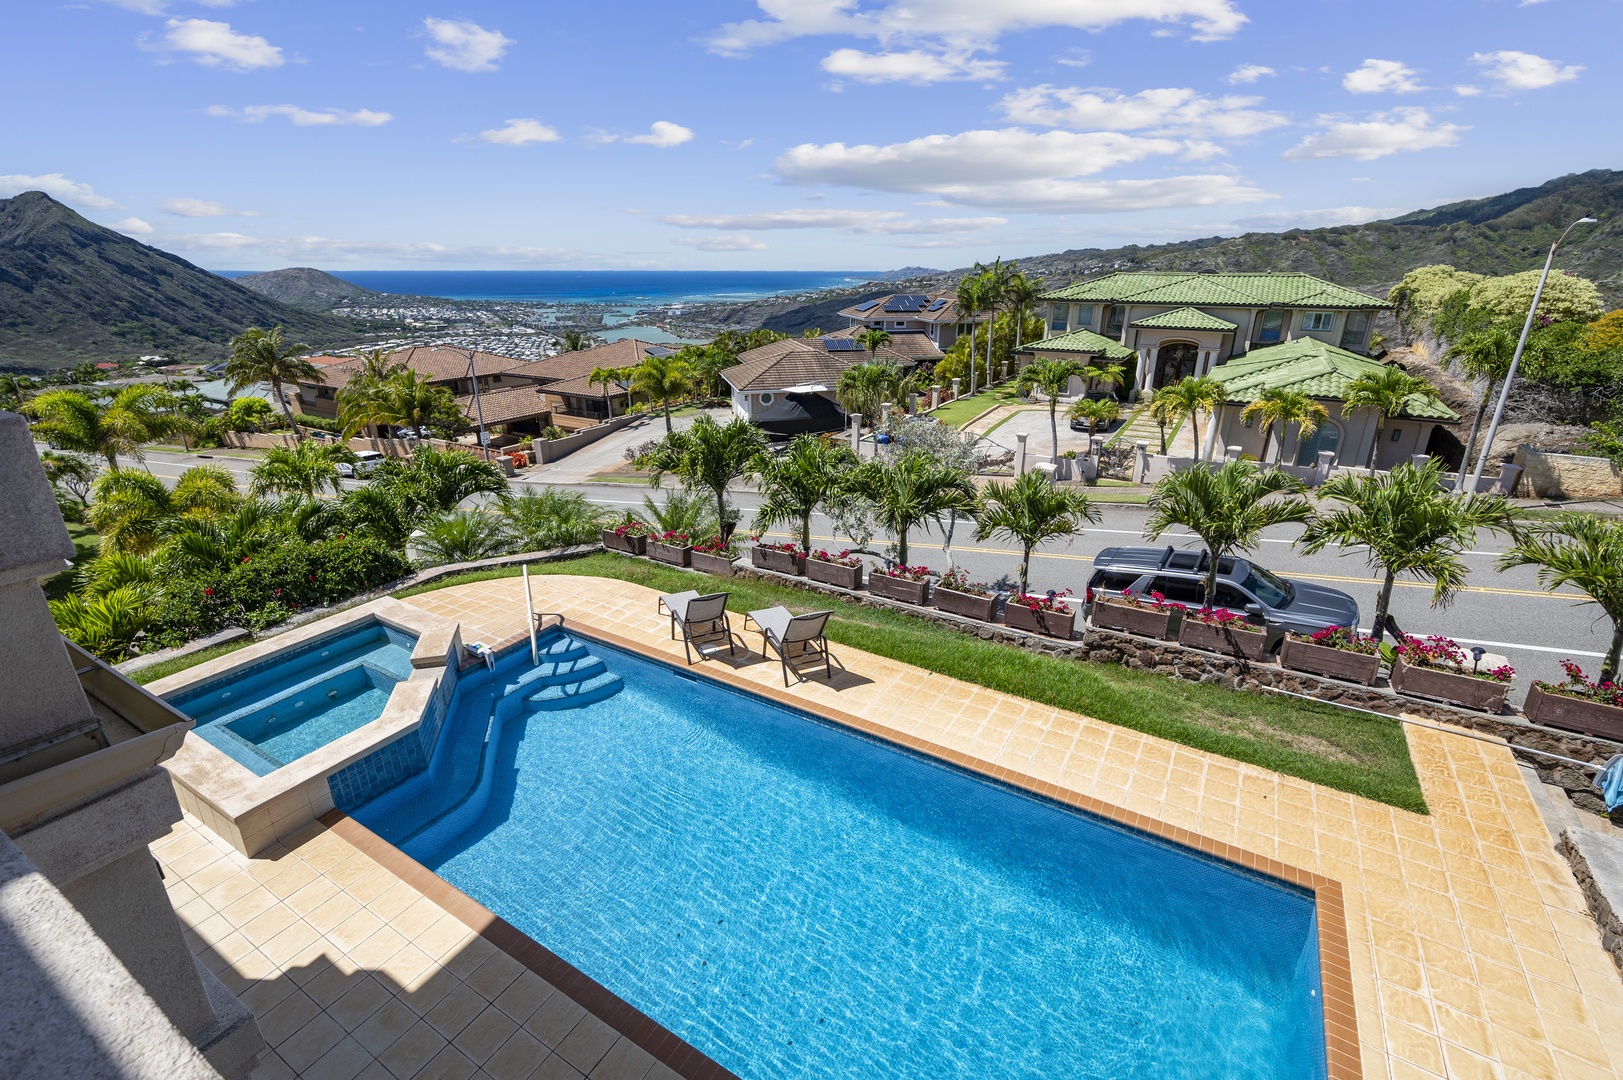 Honolulu Vacation Rentals, Lotus on a Hill* - Overhead view of your private pool deck, complete with a private hot tub and chaise lounge chairs to soak up the sun